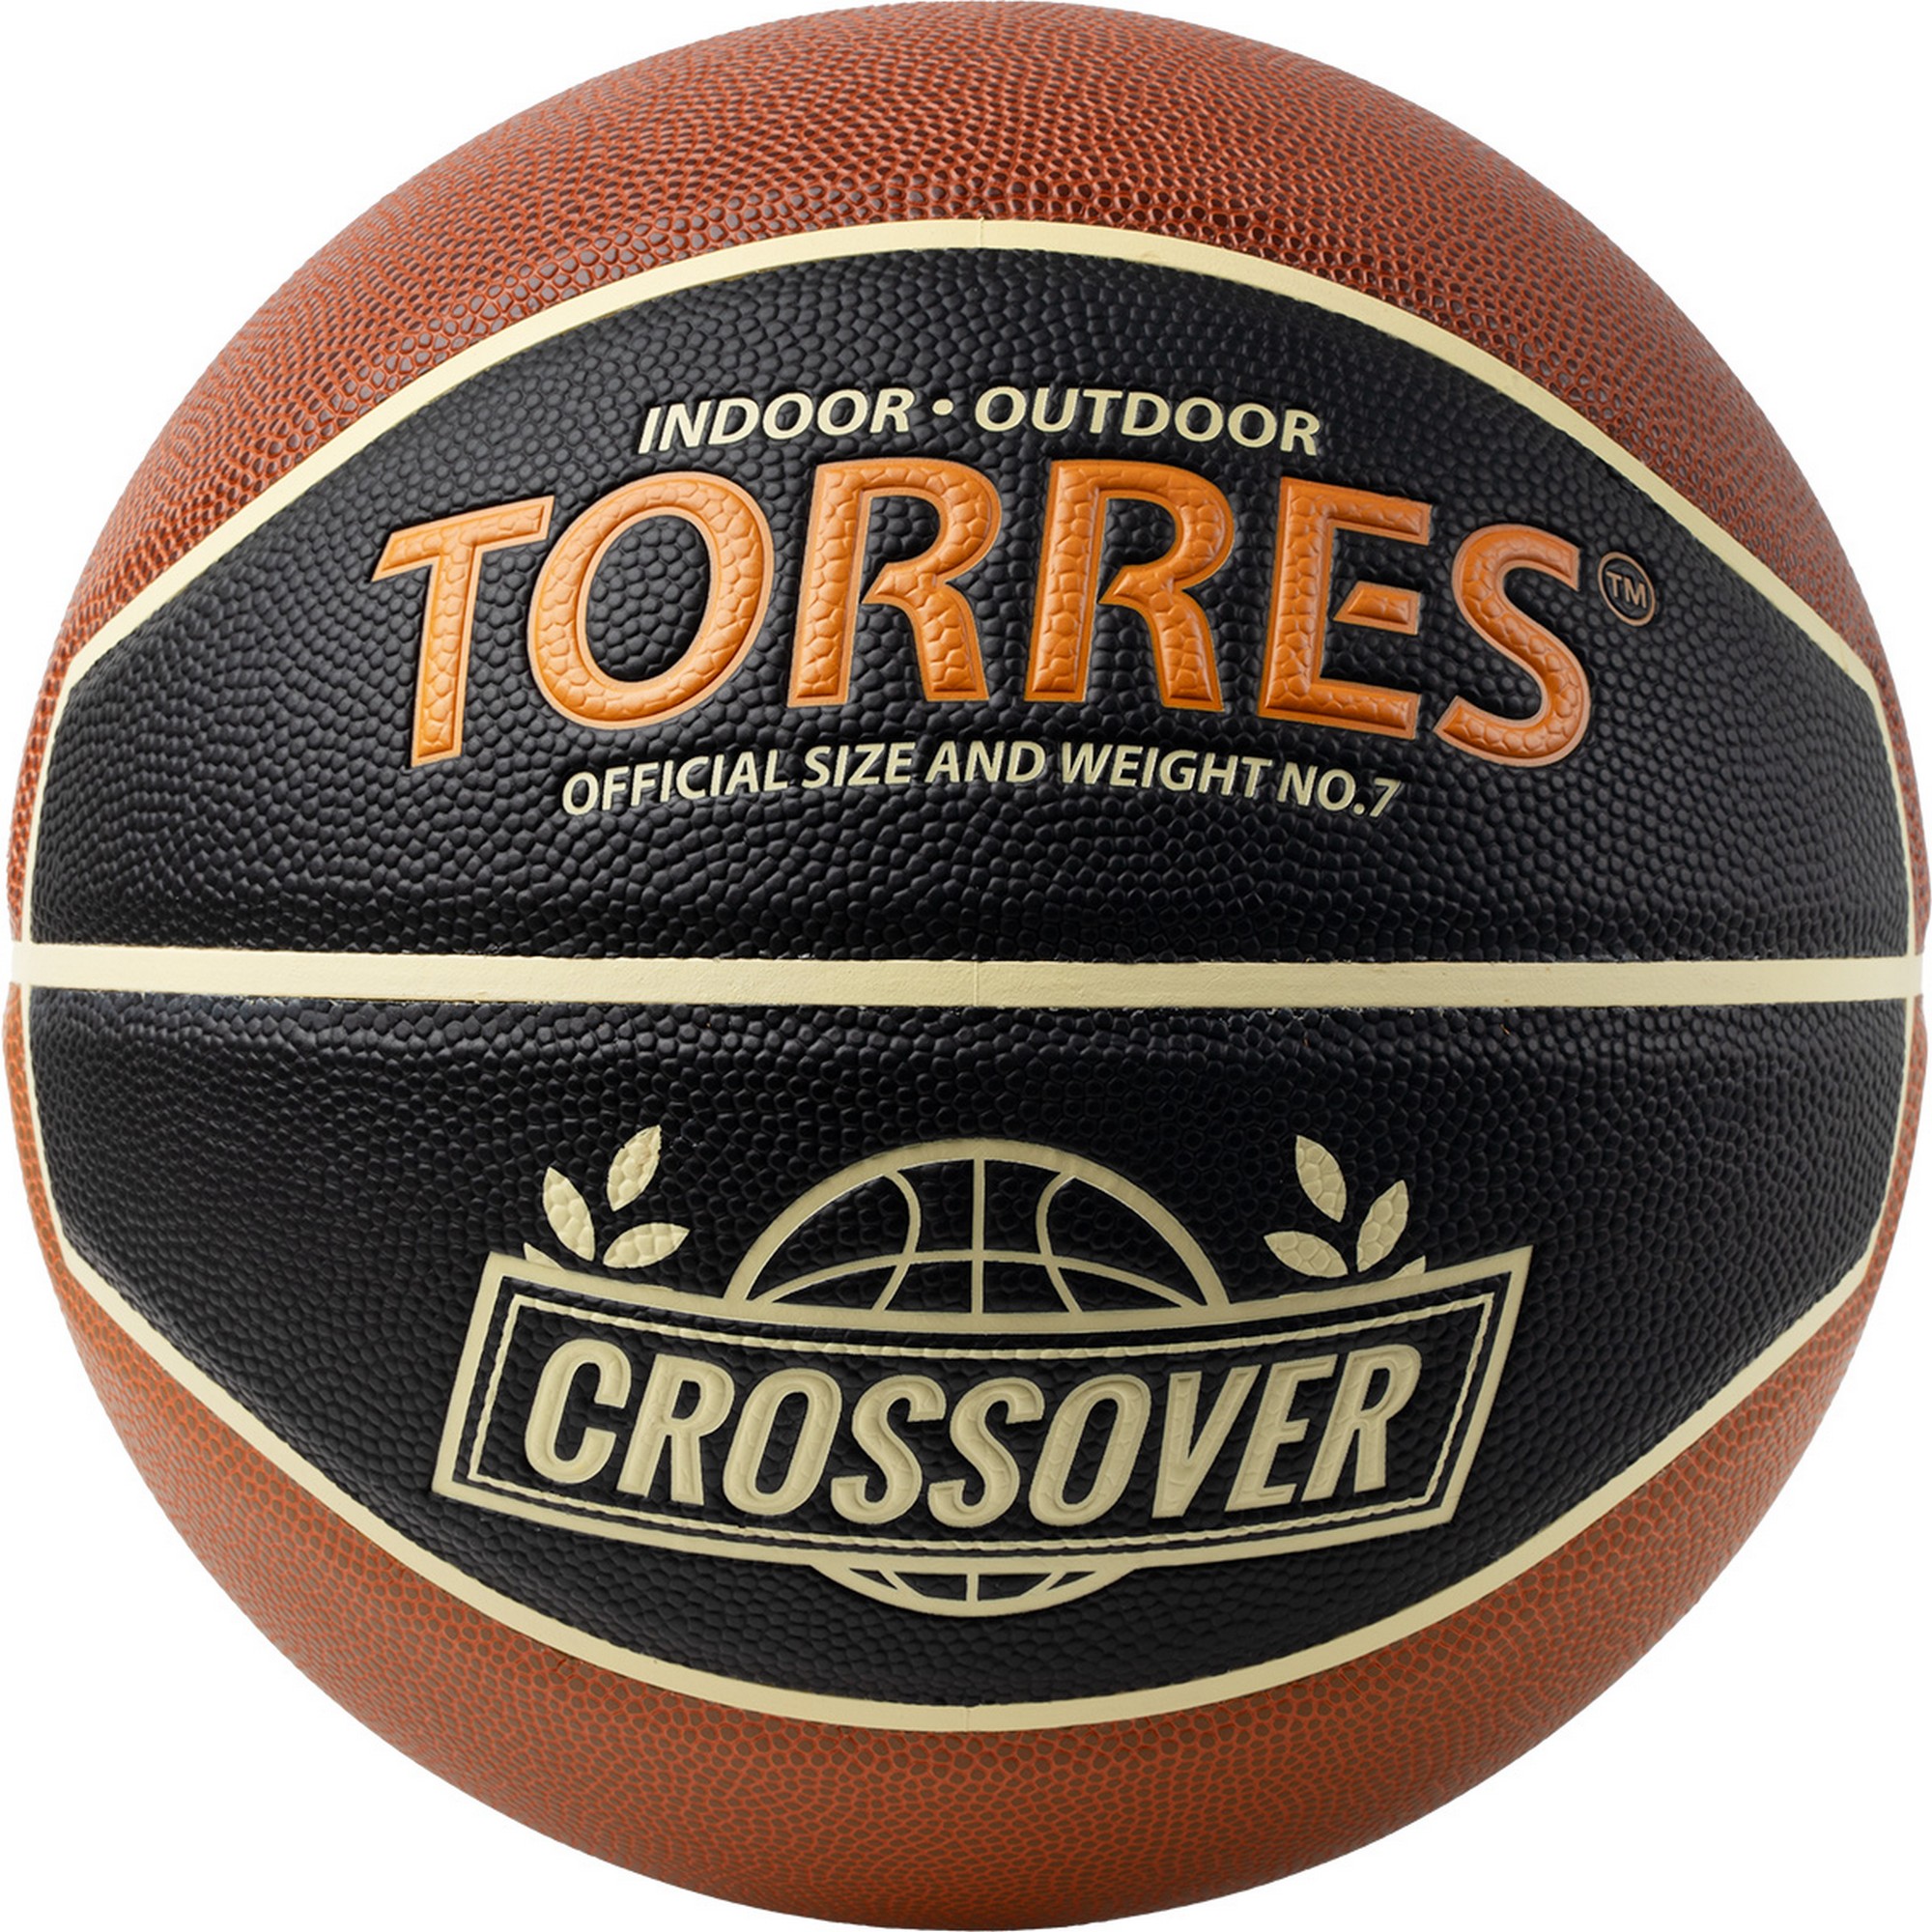   Torres Crossover B323197 .7